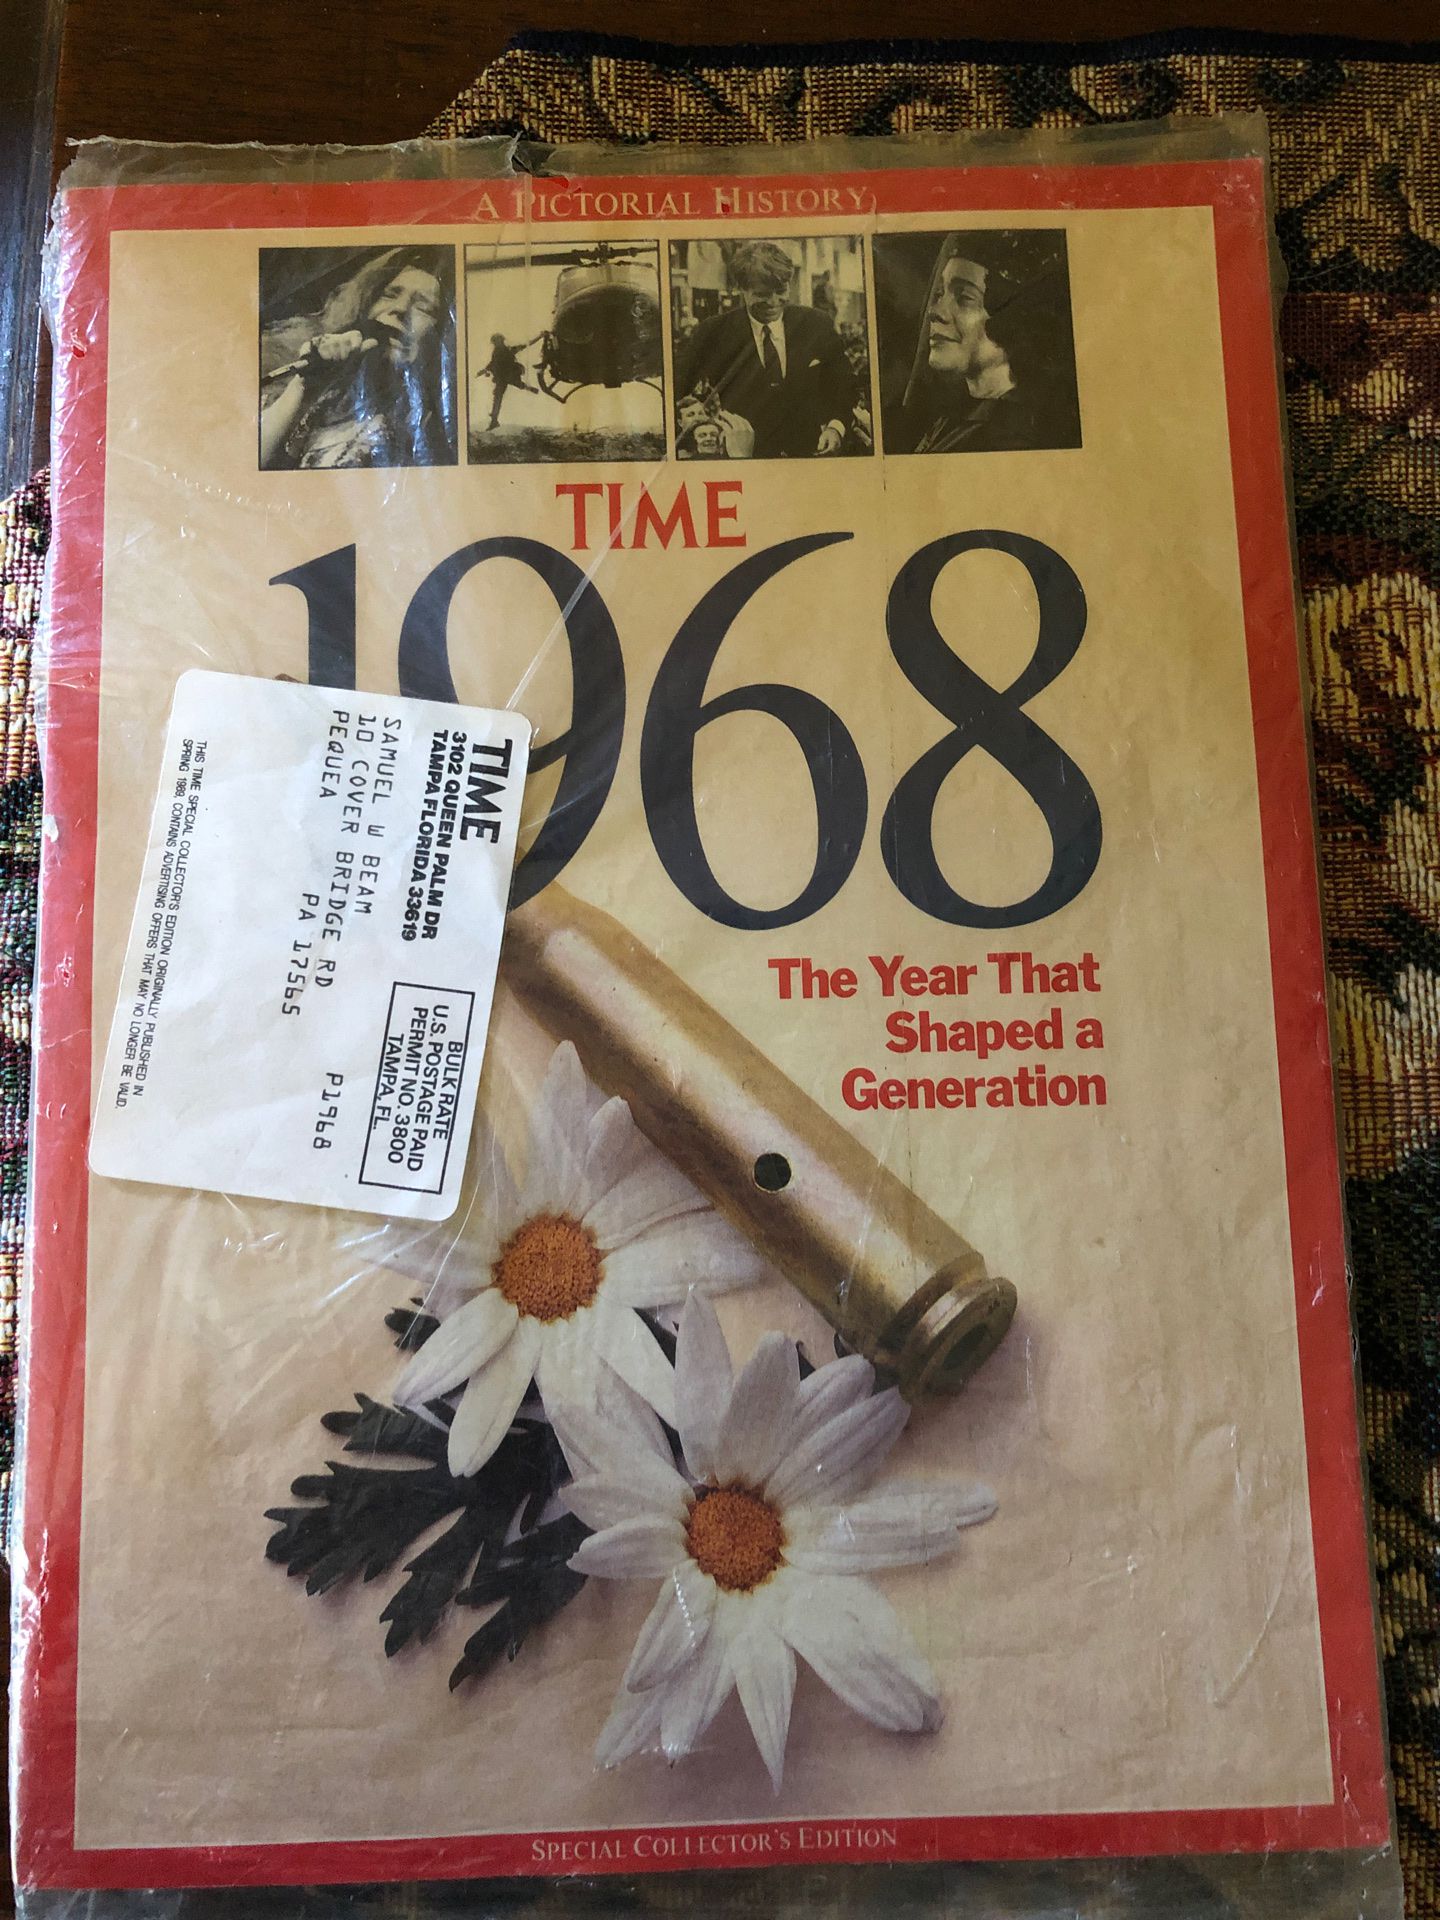 Time Magazine 1968 Pictorial History